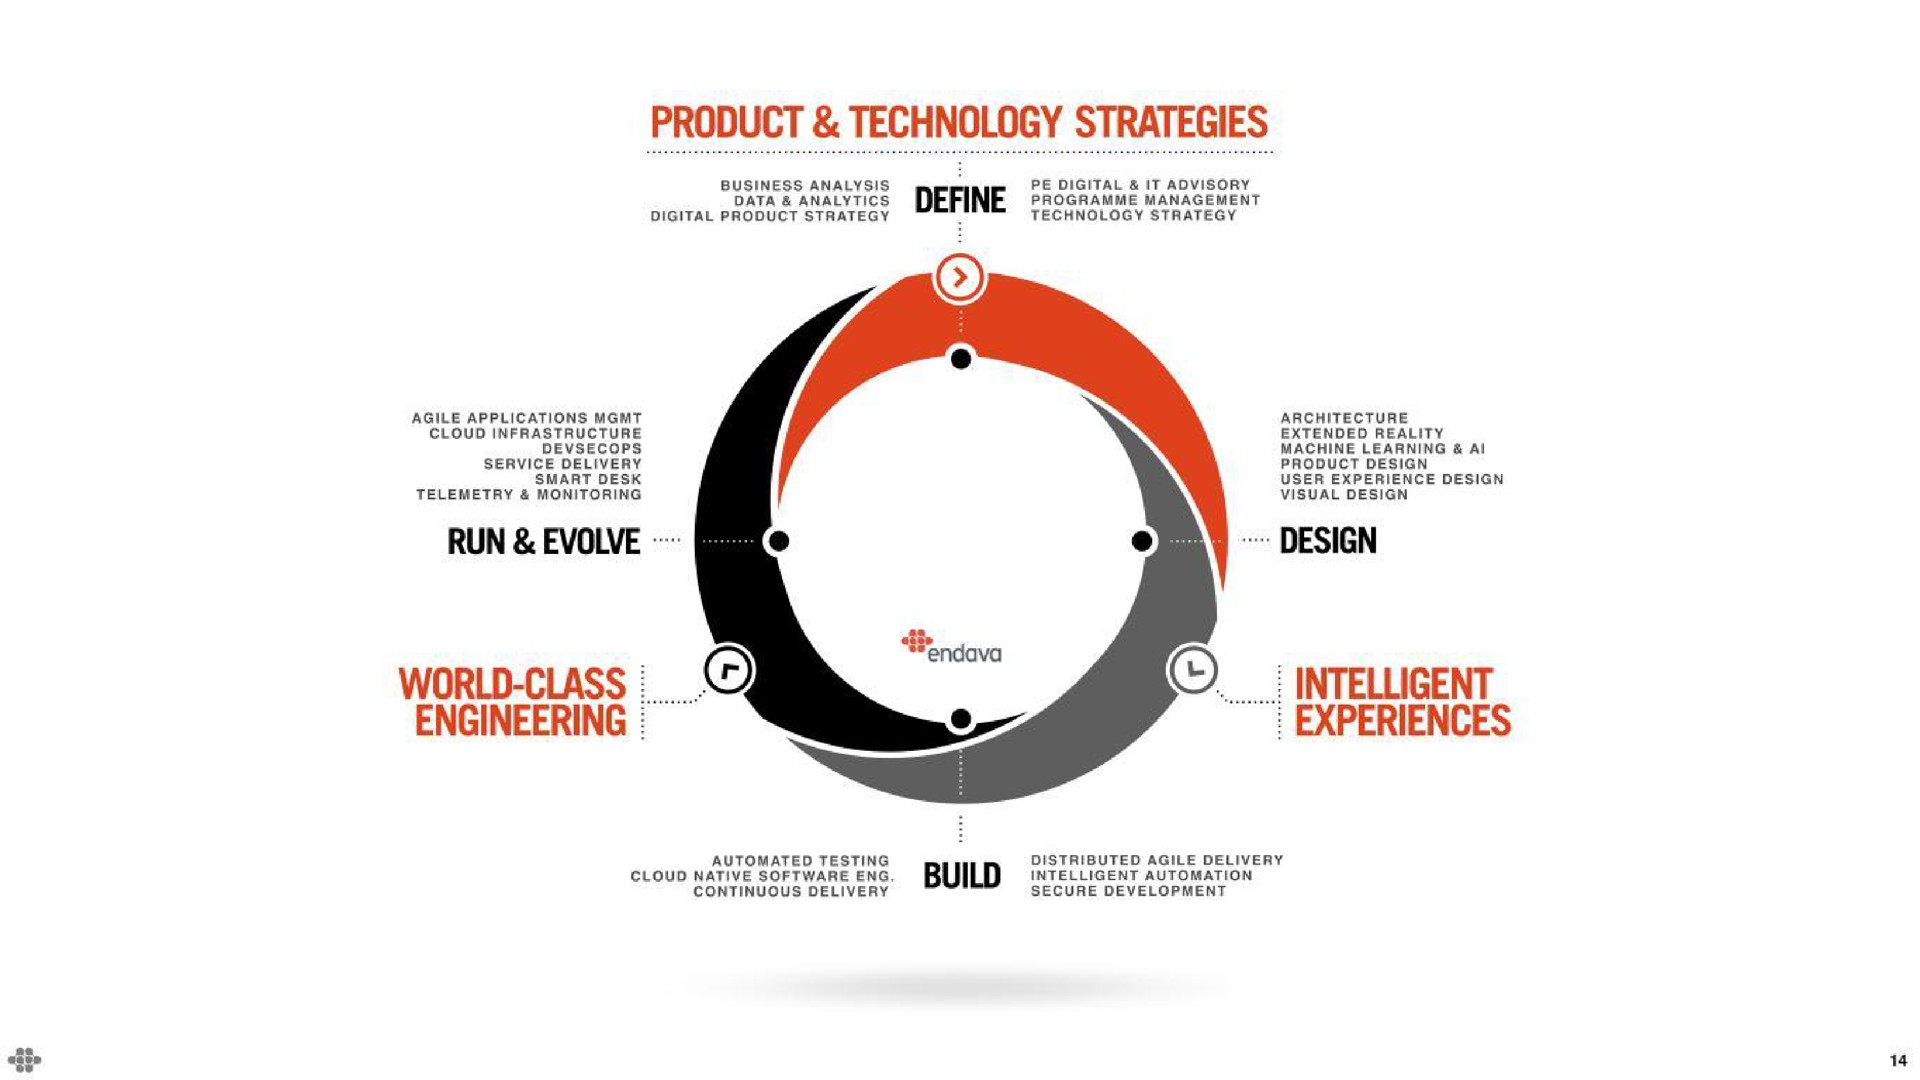 engineering run evolve product technology strategies design intelligent experiences testing continuous delivery secure development | Endava